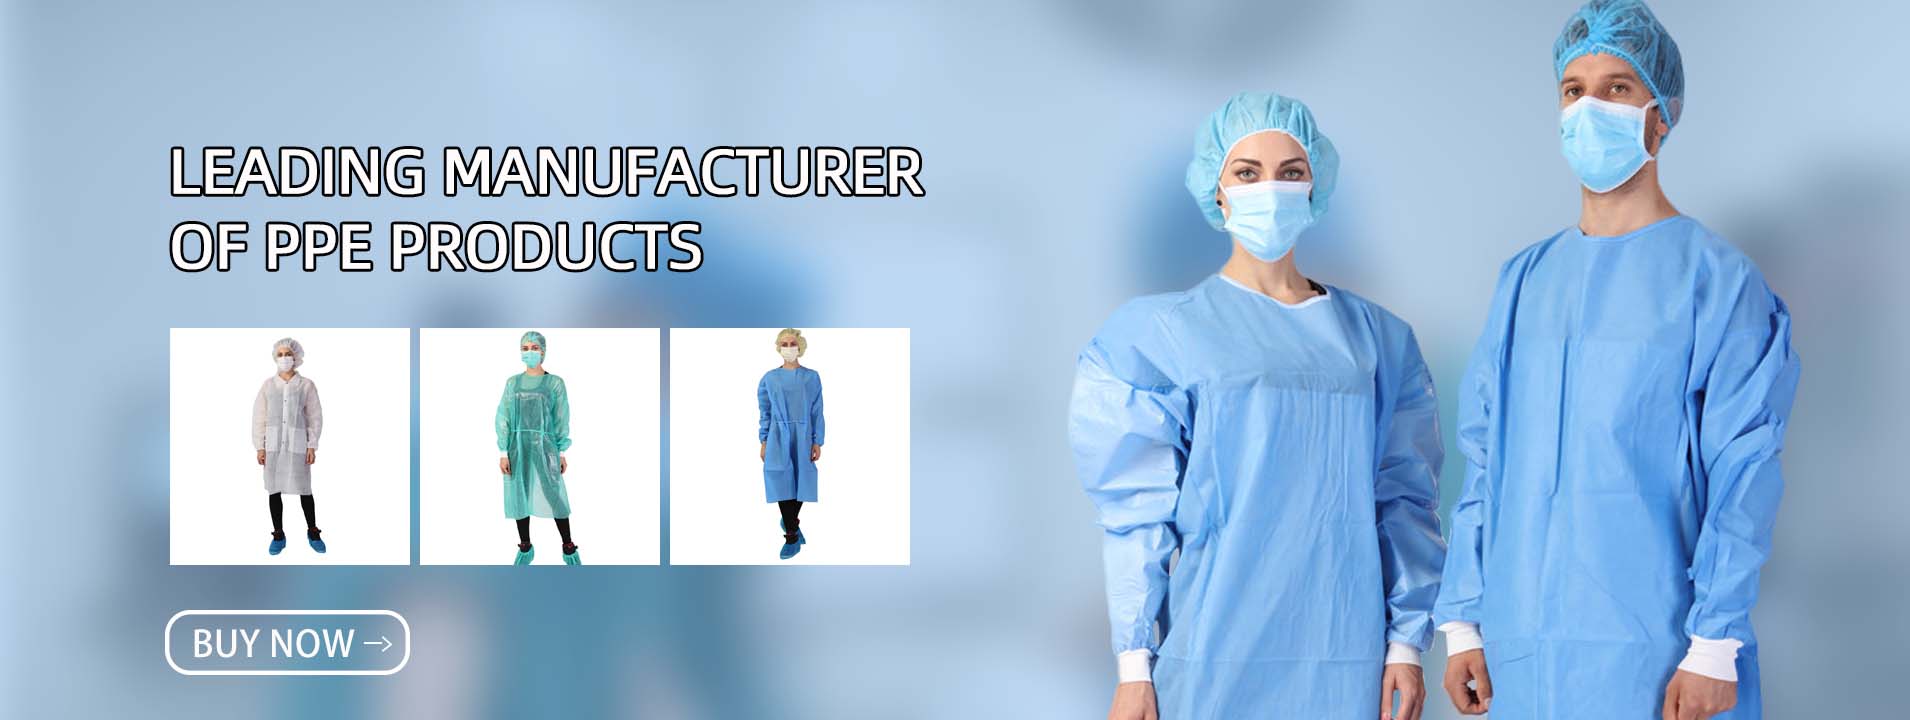 Leading Manufacturer Of PPE Products